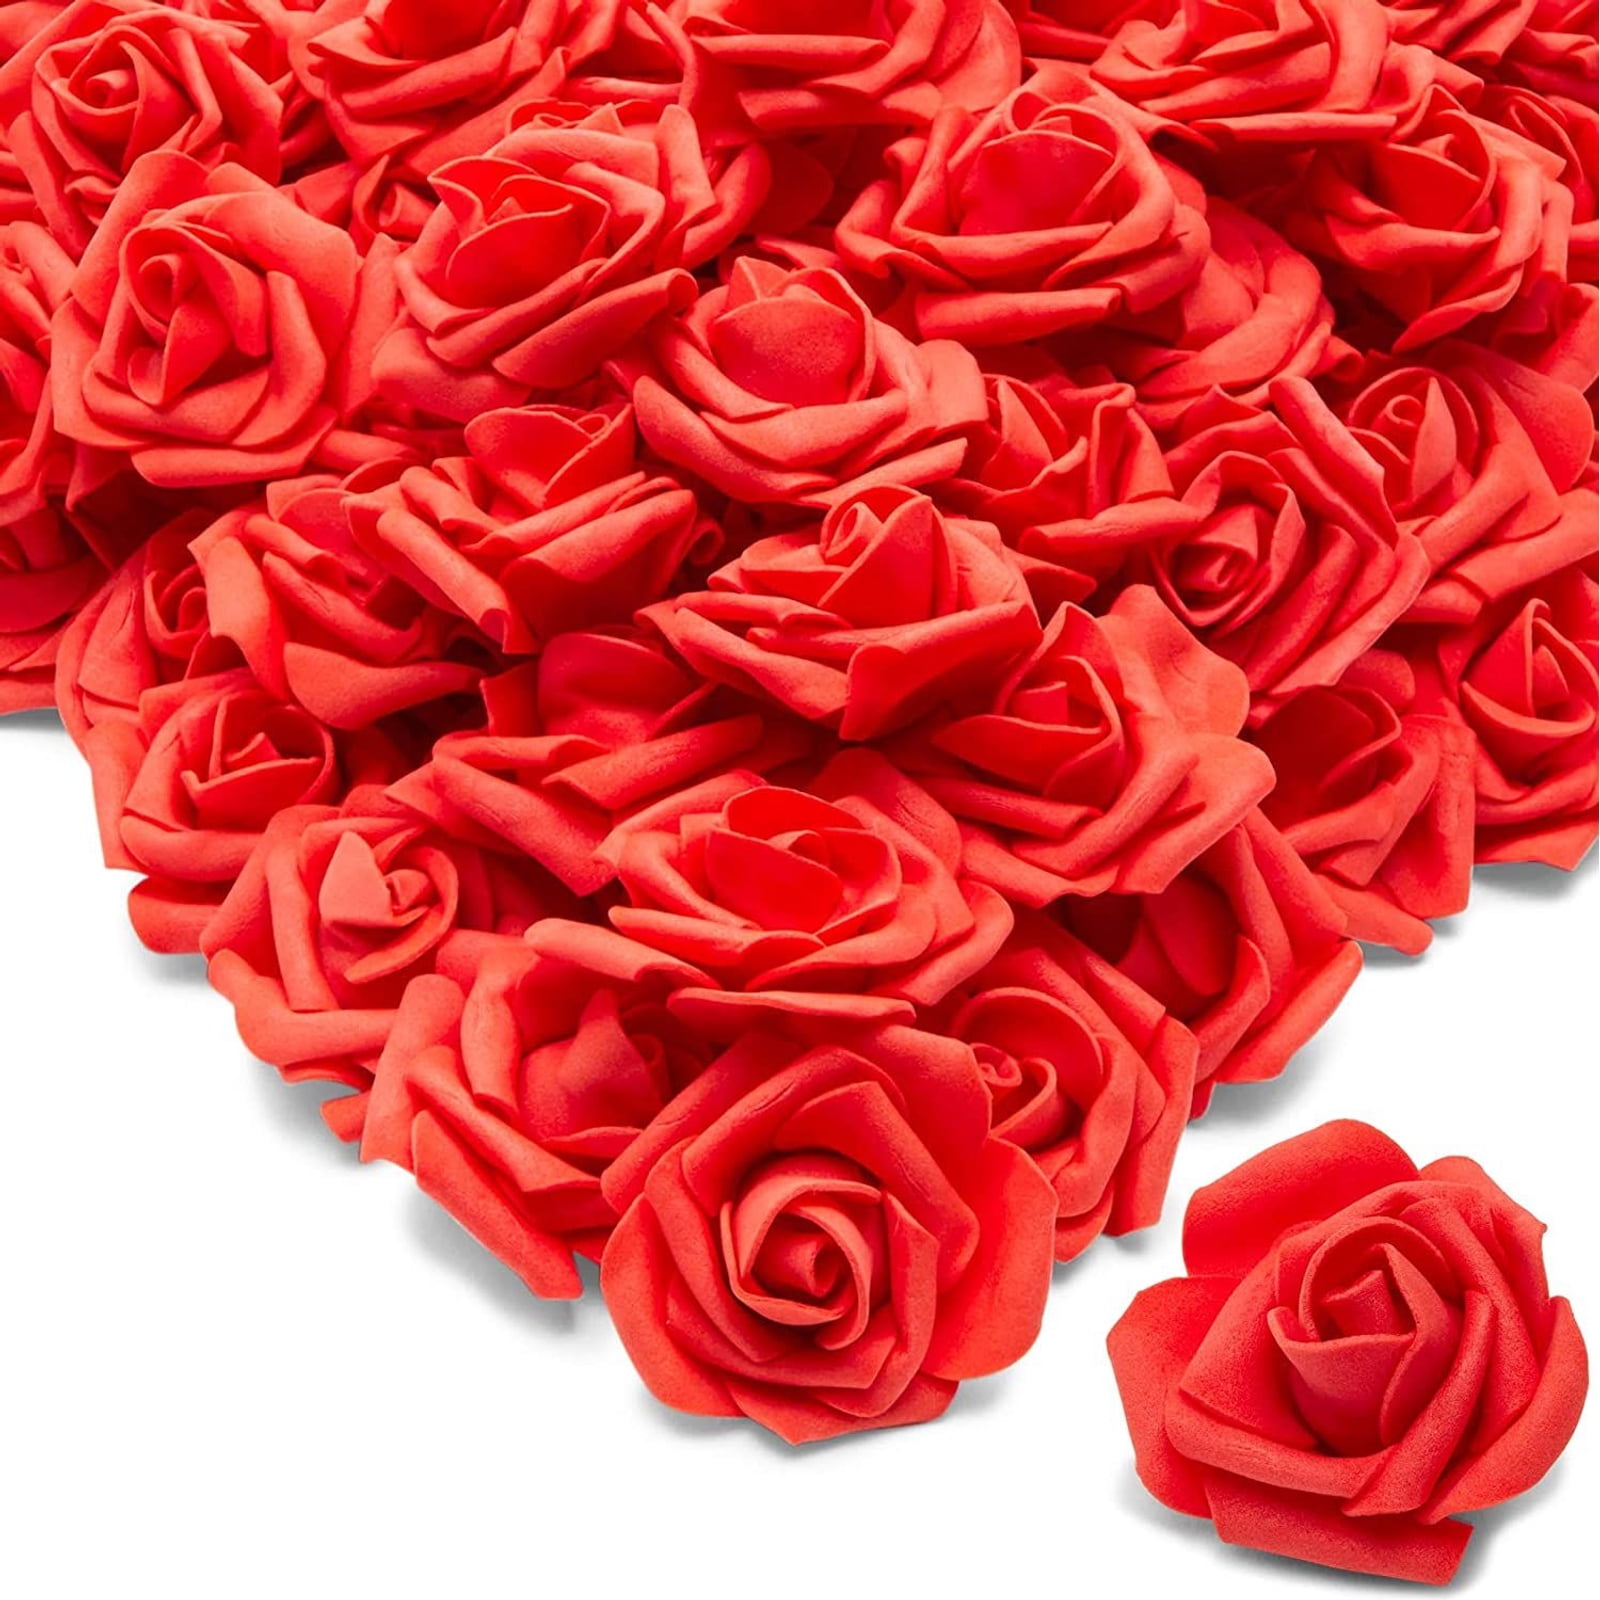 8 Inch Foam Roses DIY Craft Wedding Party Backdrop Photo Wall Decor 6 Pack 